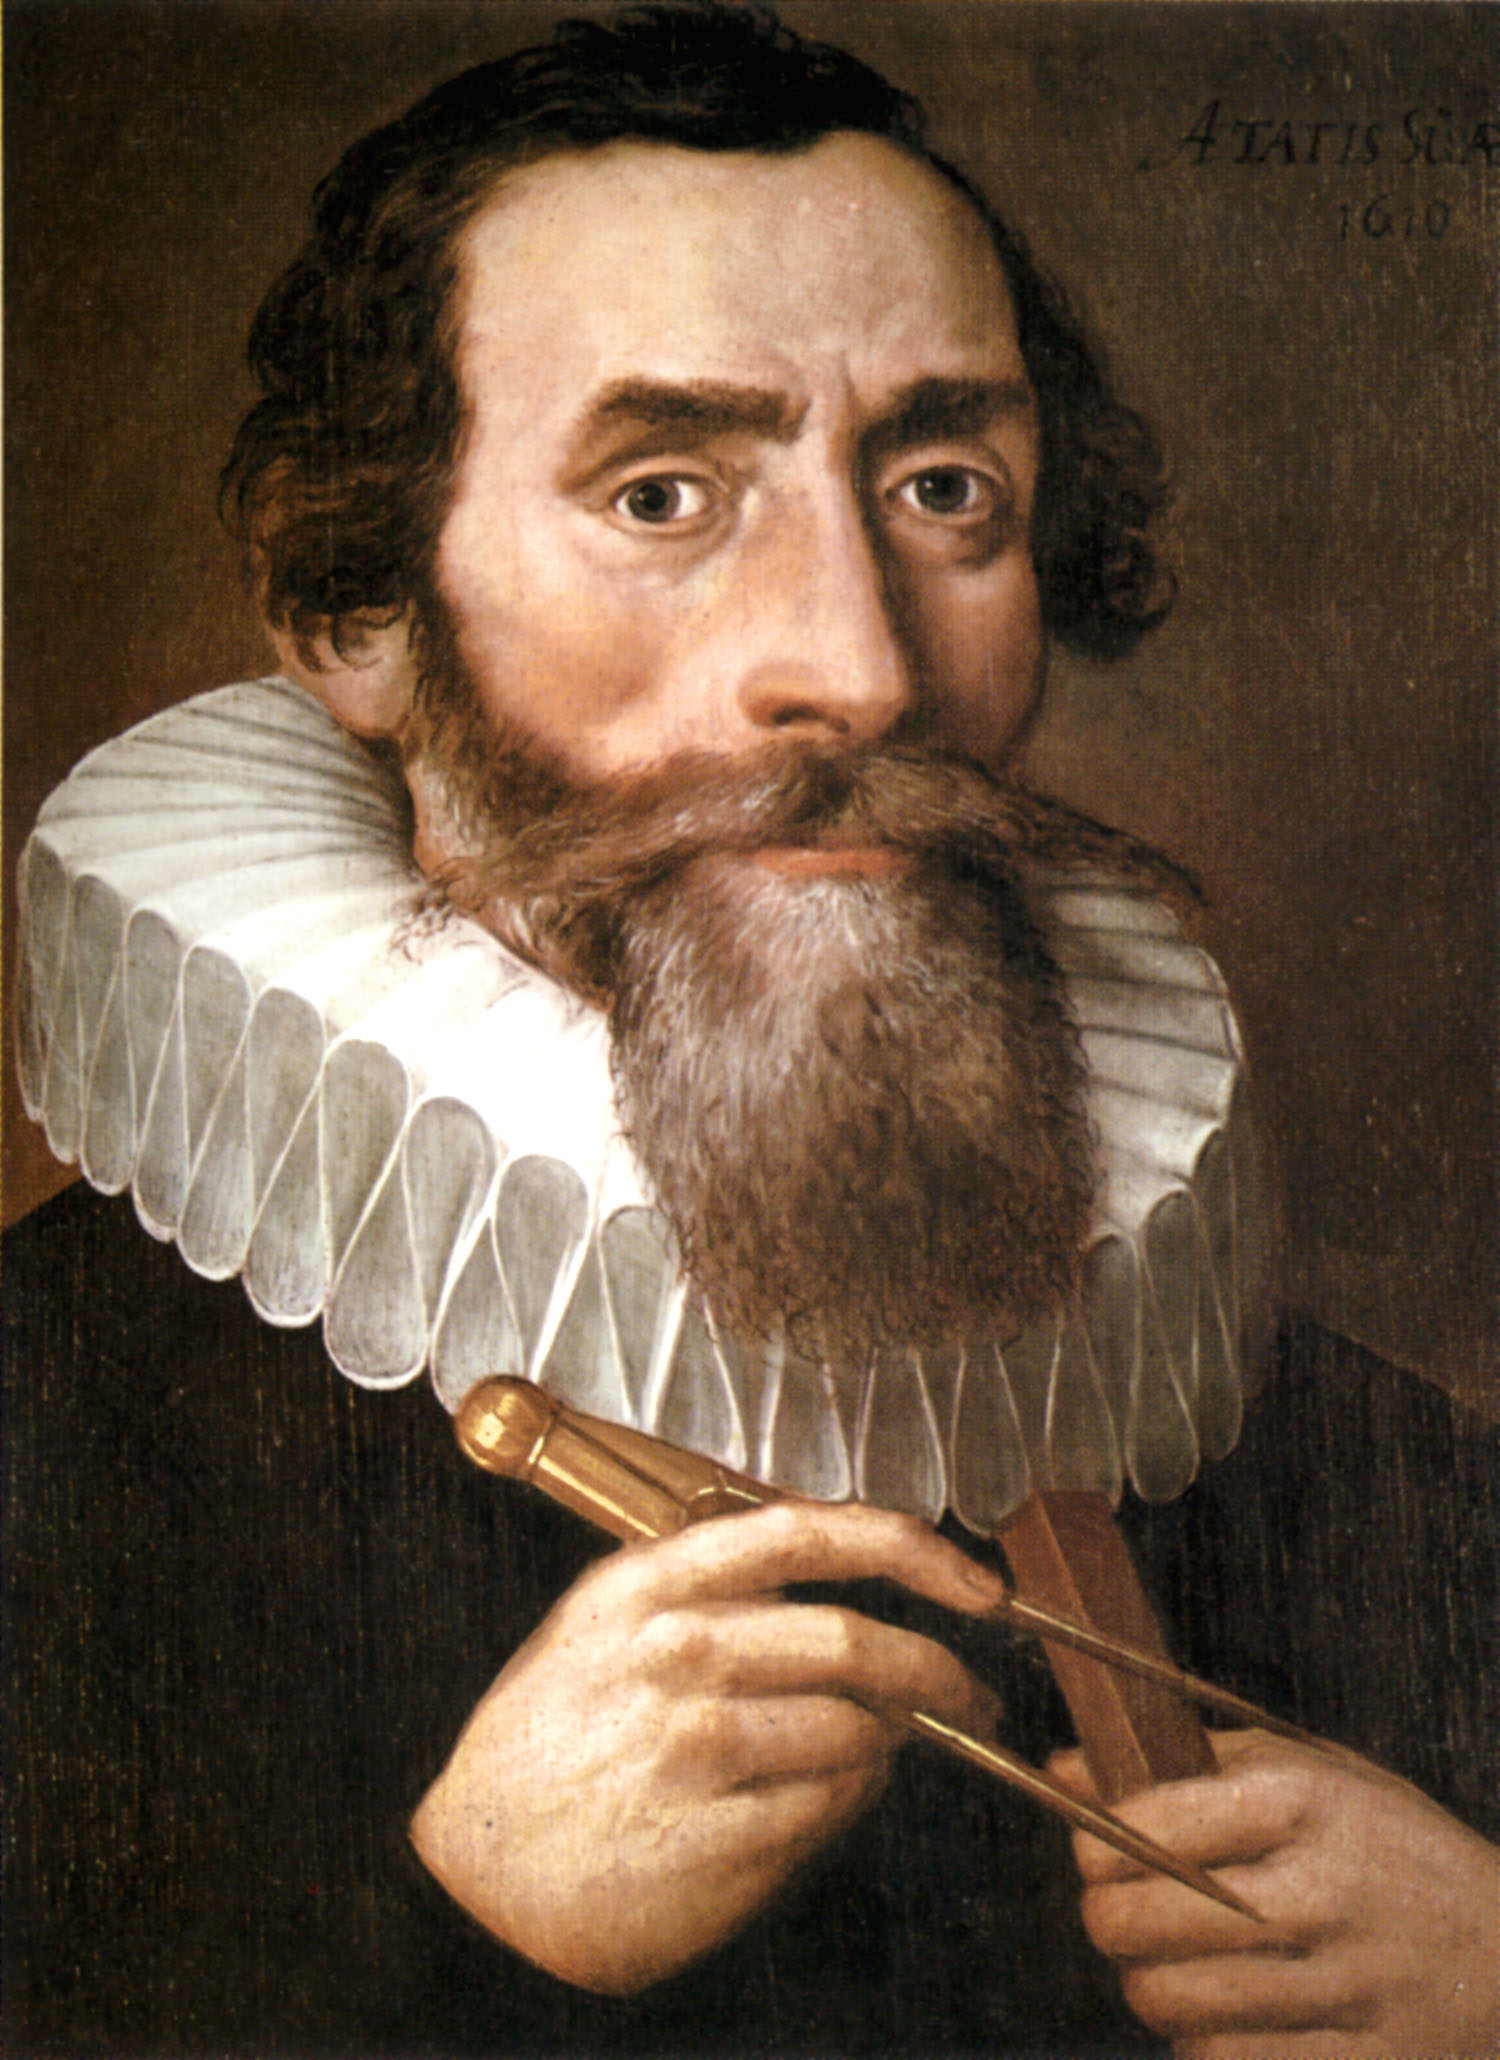 1571: Astronomer Johannes Kepler – Author of Probably the First SF Novel in History